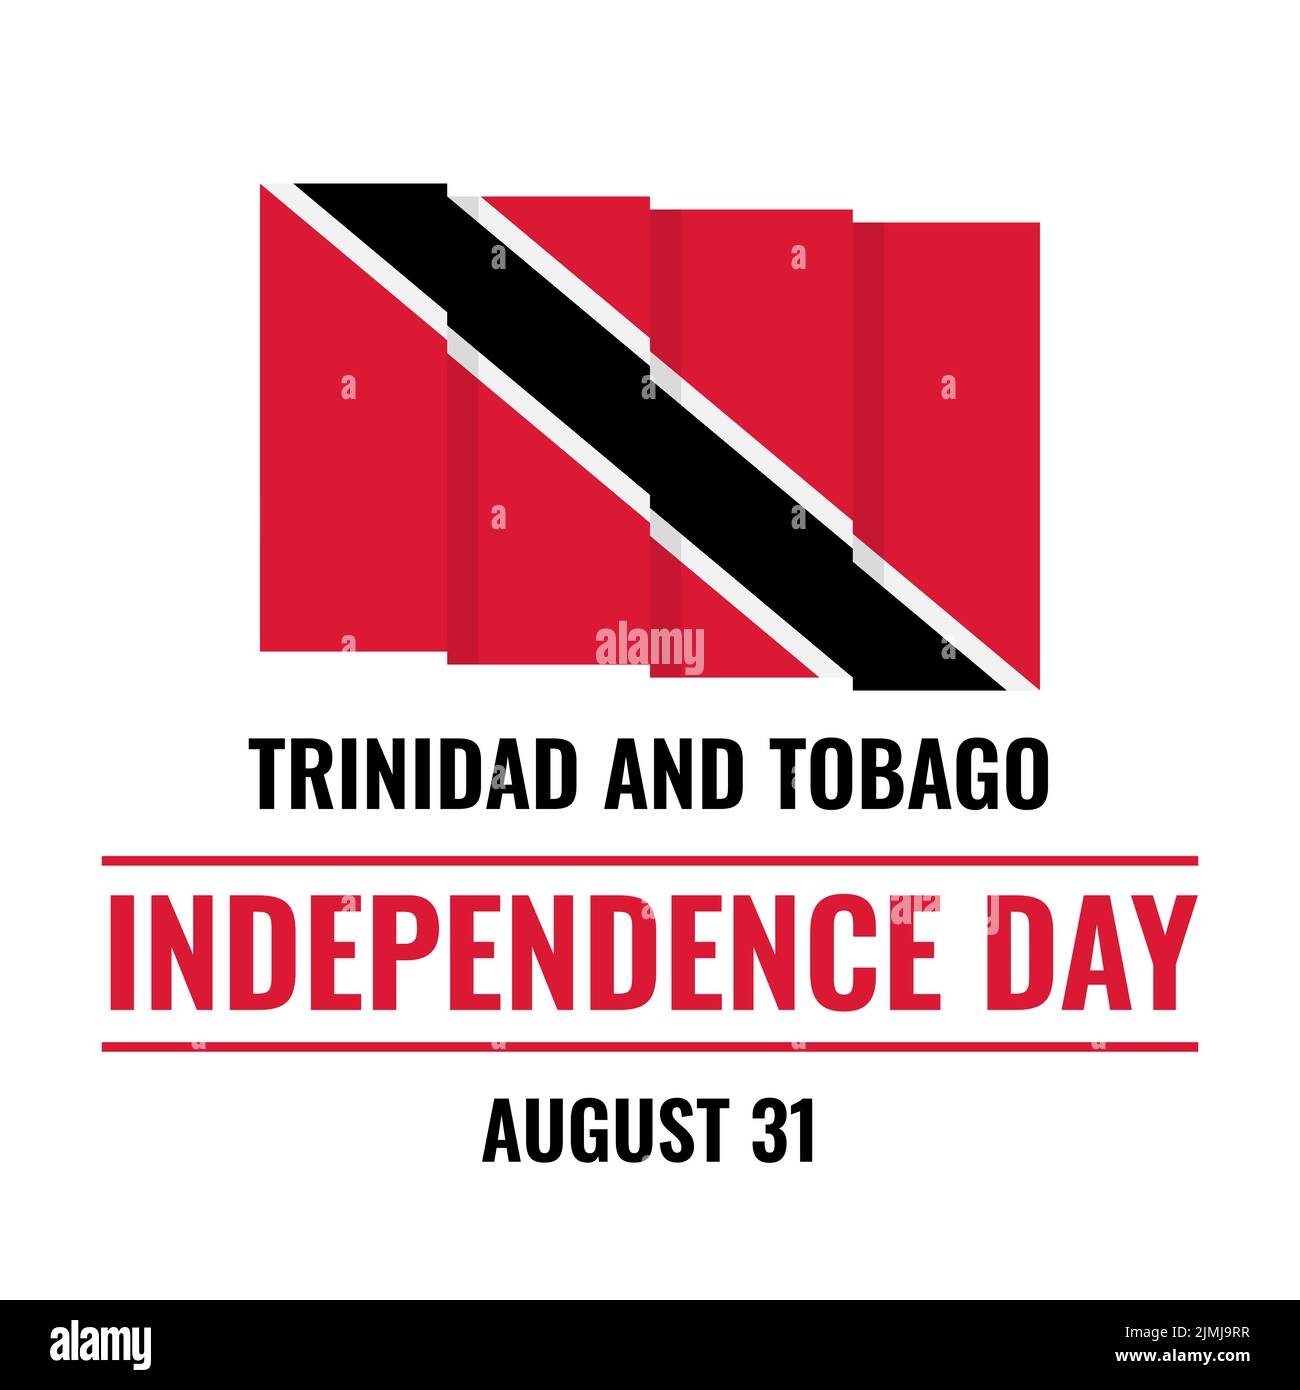 Trinidad And Tobago Independence Day Typography Poster National